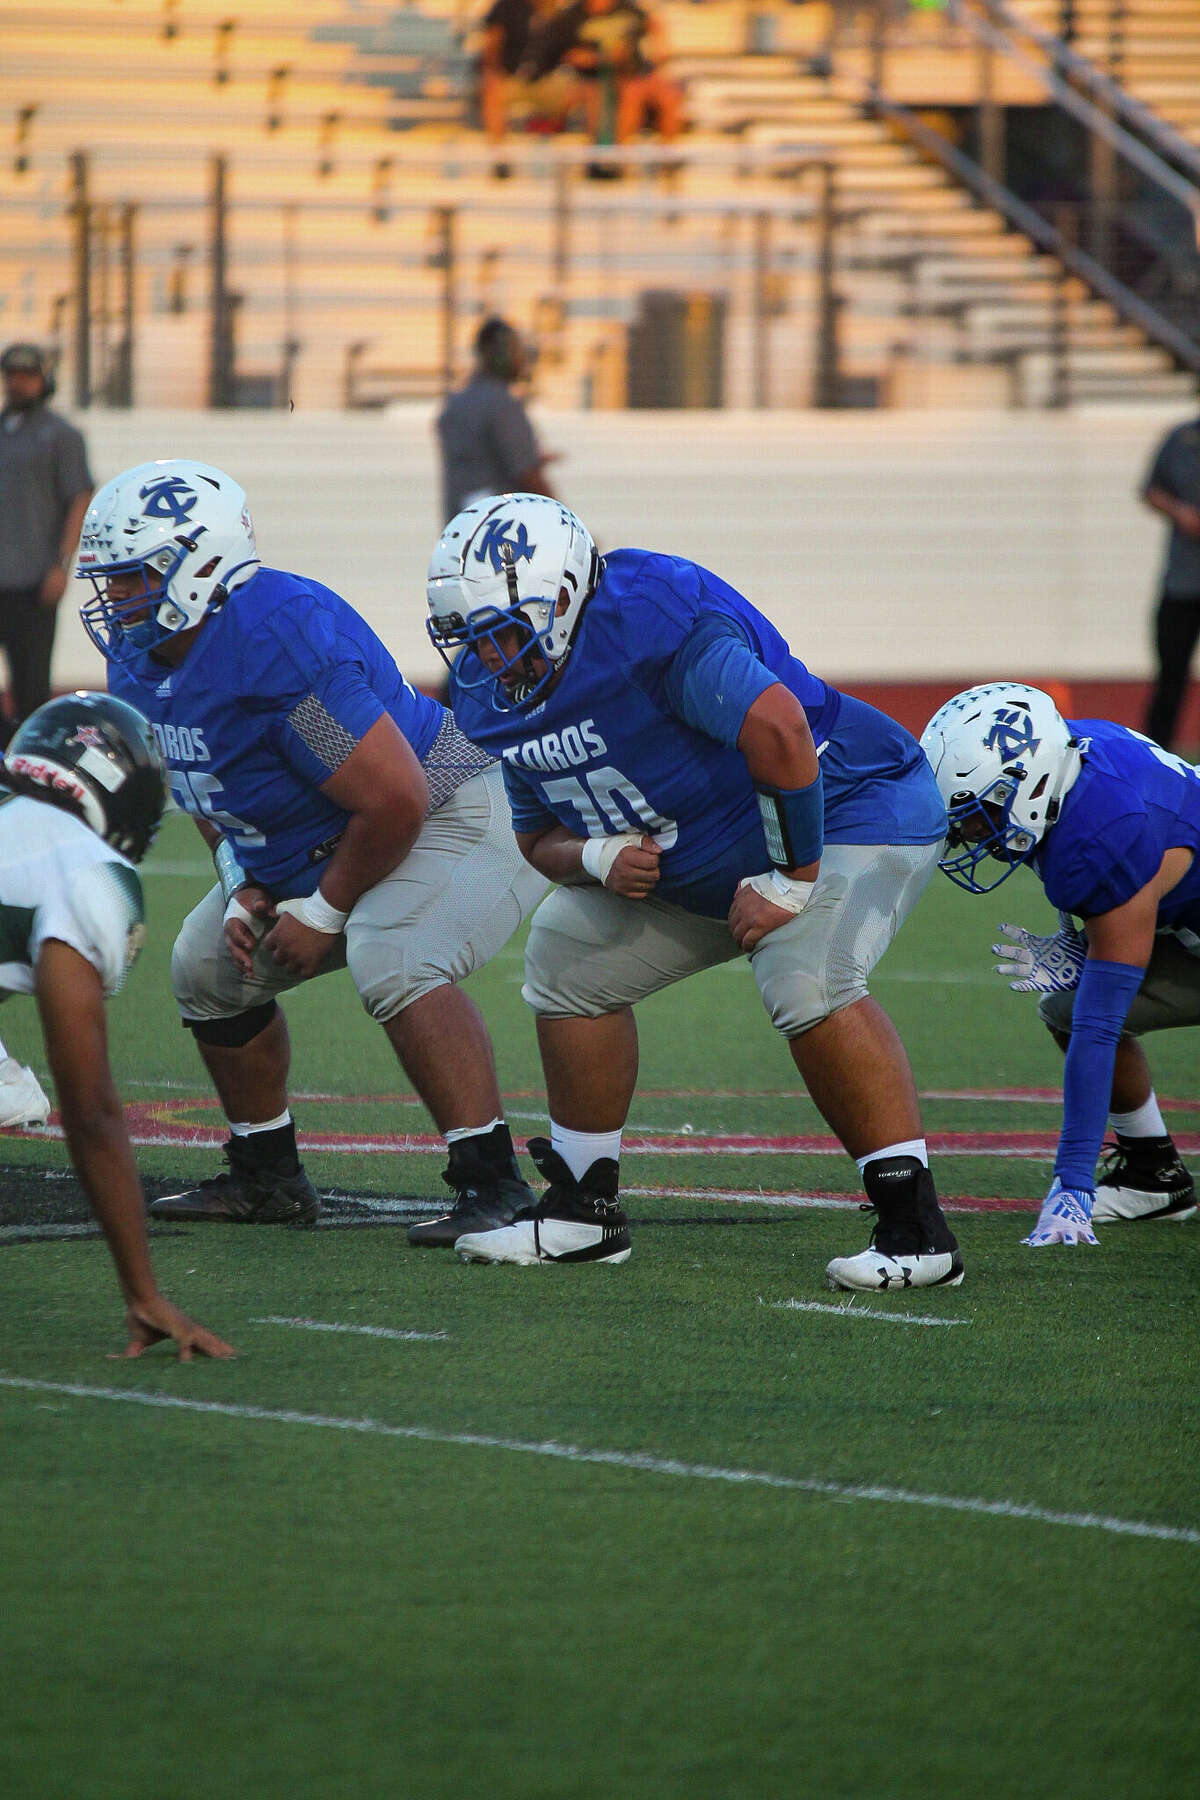 Esteban Garcia is a starting offensive lineman at Cigarroa. His dad is currently battling Stage 4 stomach cancer.